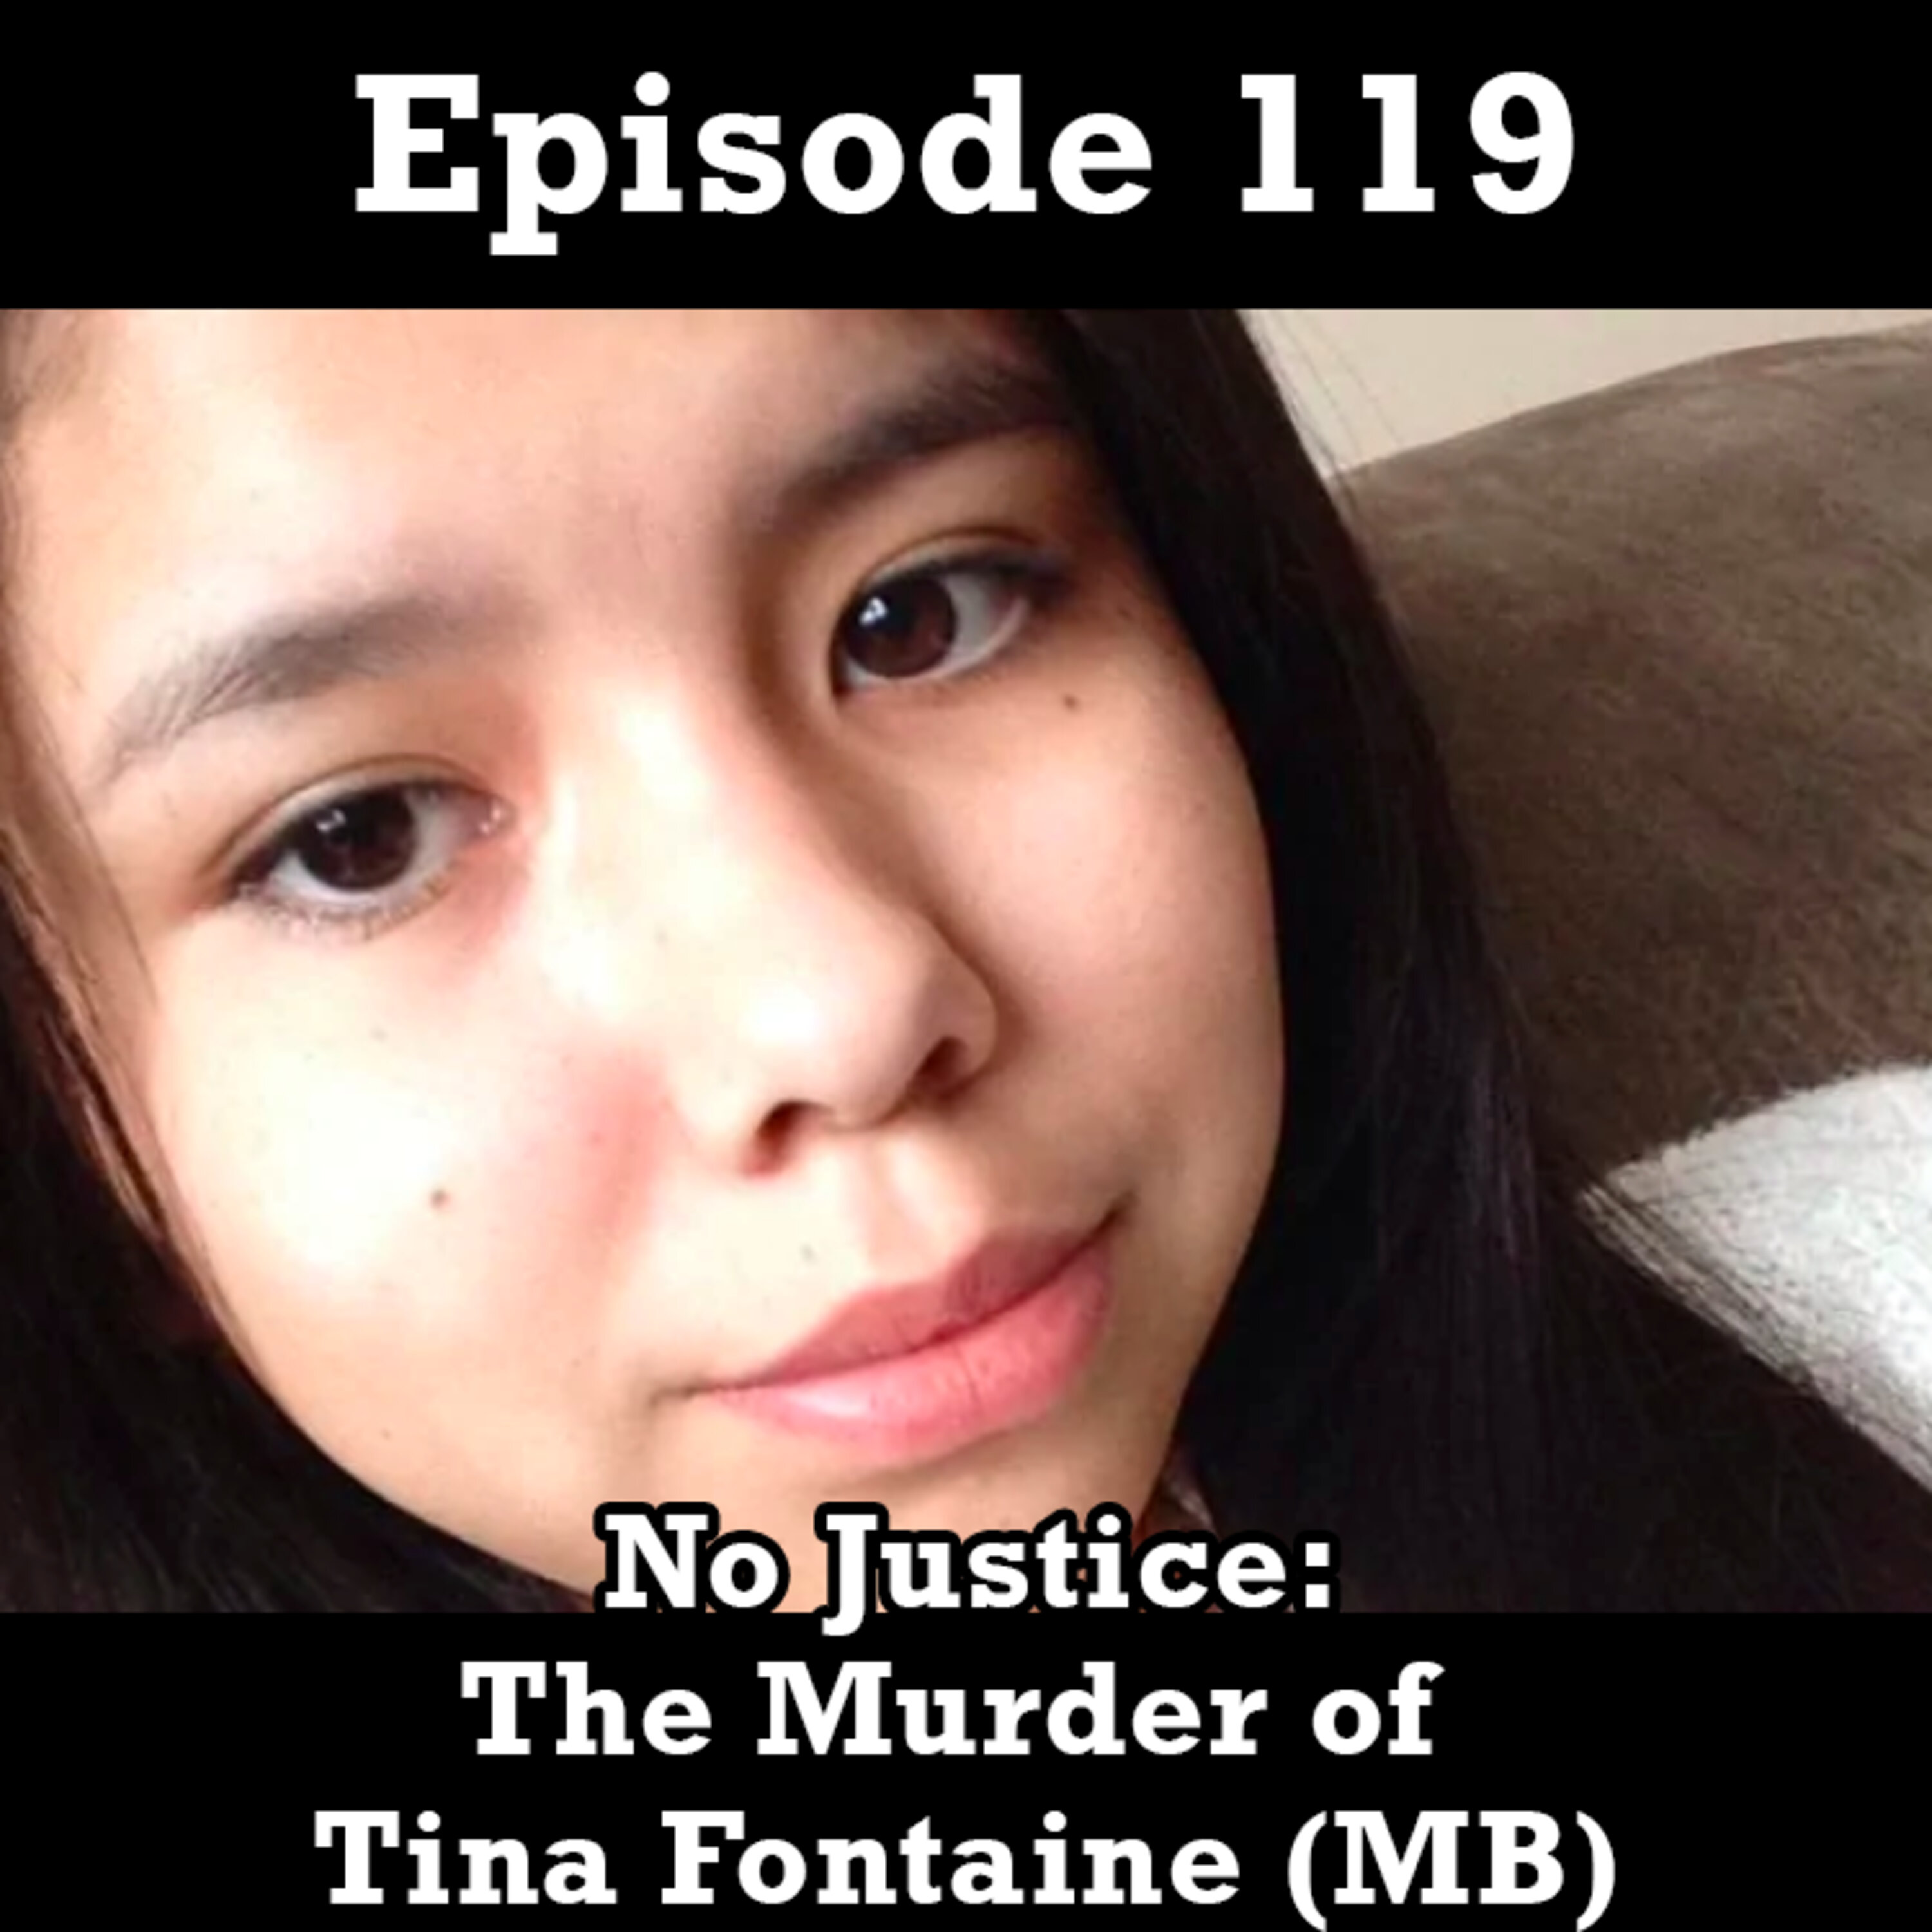 MMIW - No Justice - The Murder of Tina Fontaine (MB) pic